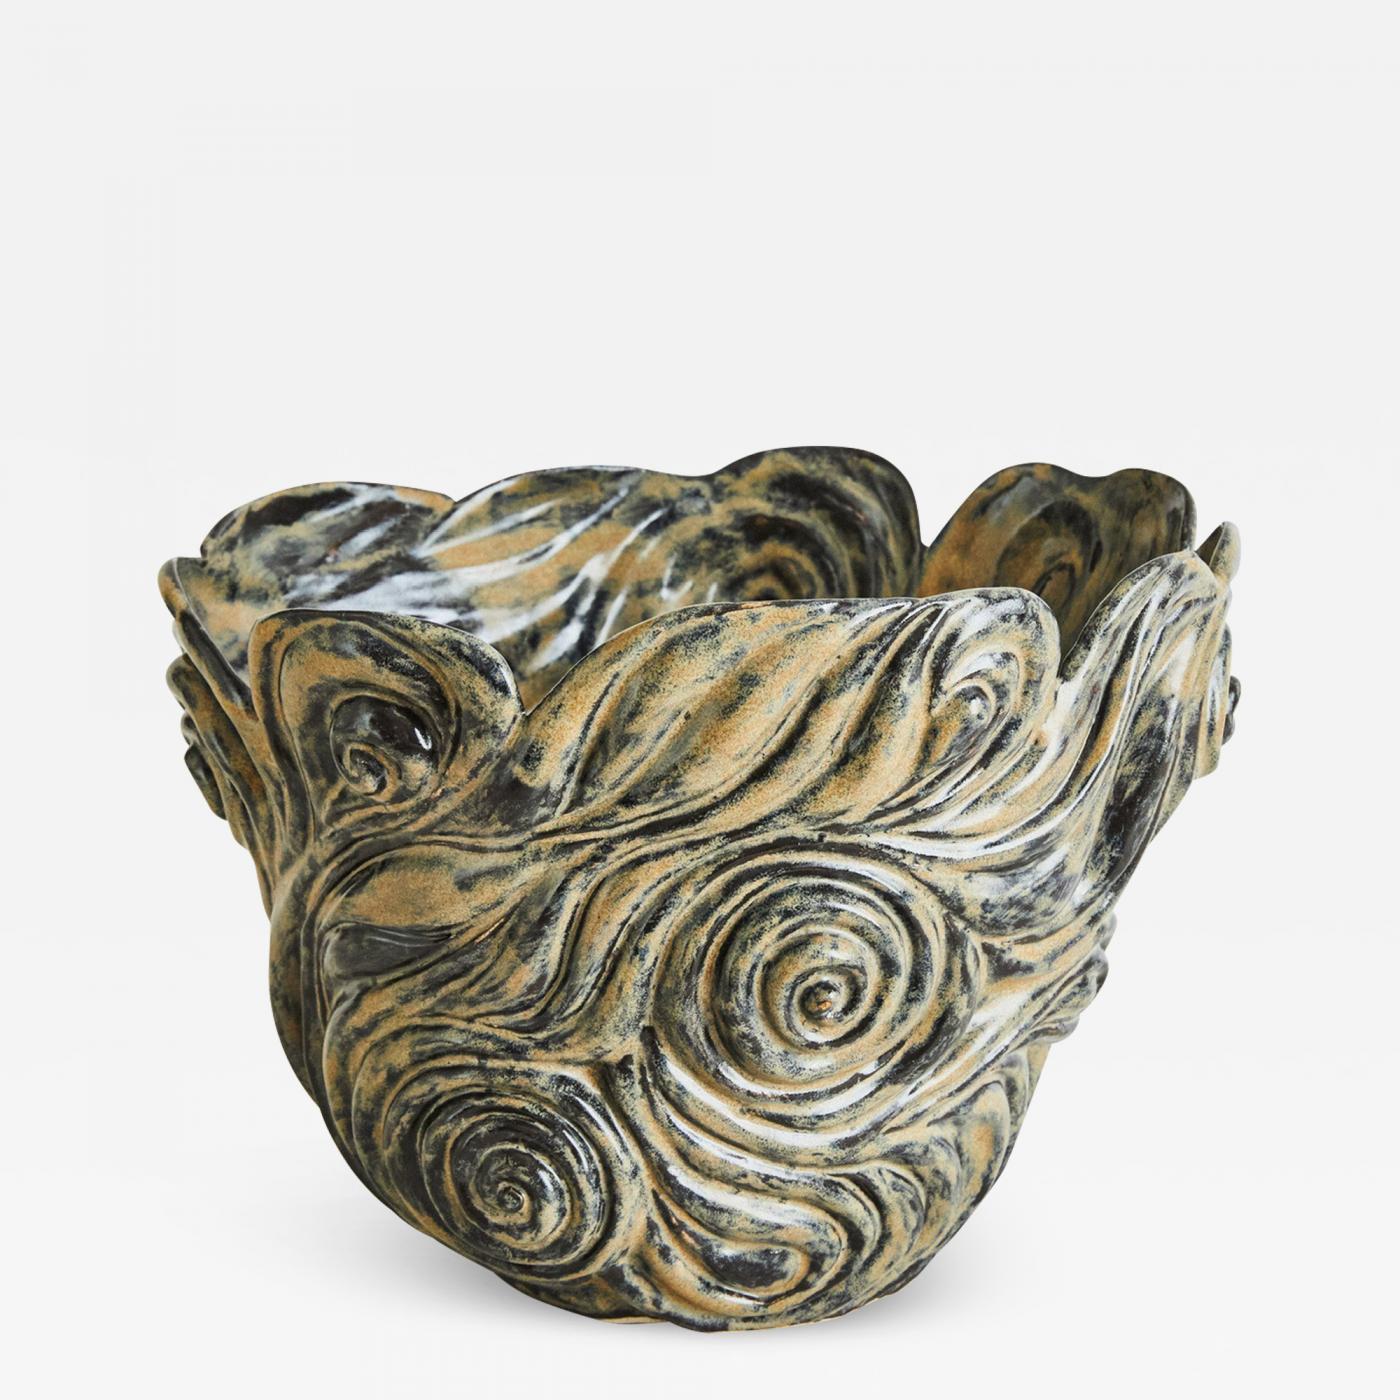 R. A. PESCE. Wheel-thrown, hand-carved biomorphic vessel